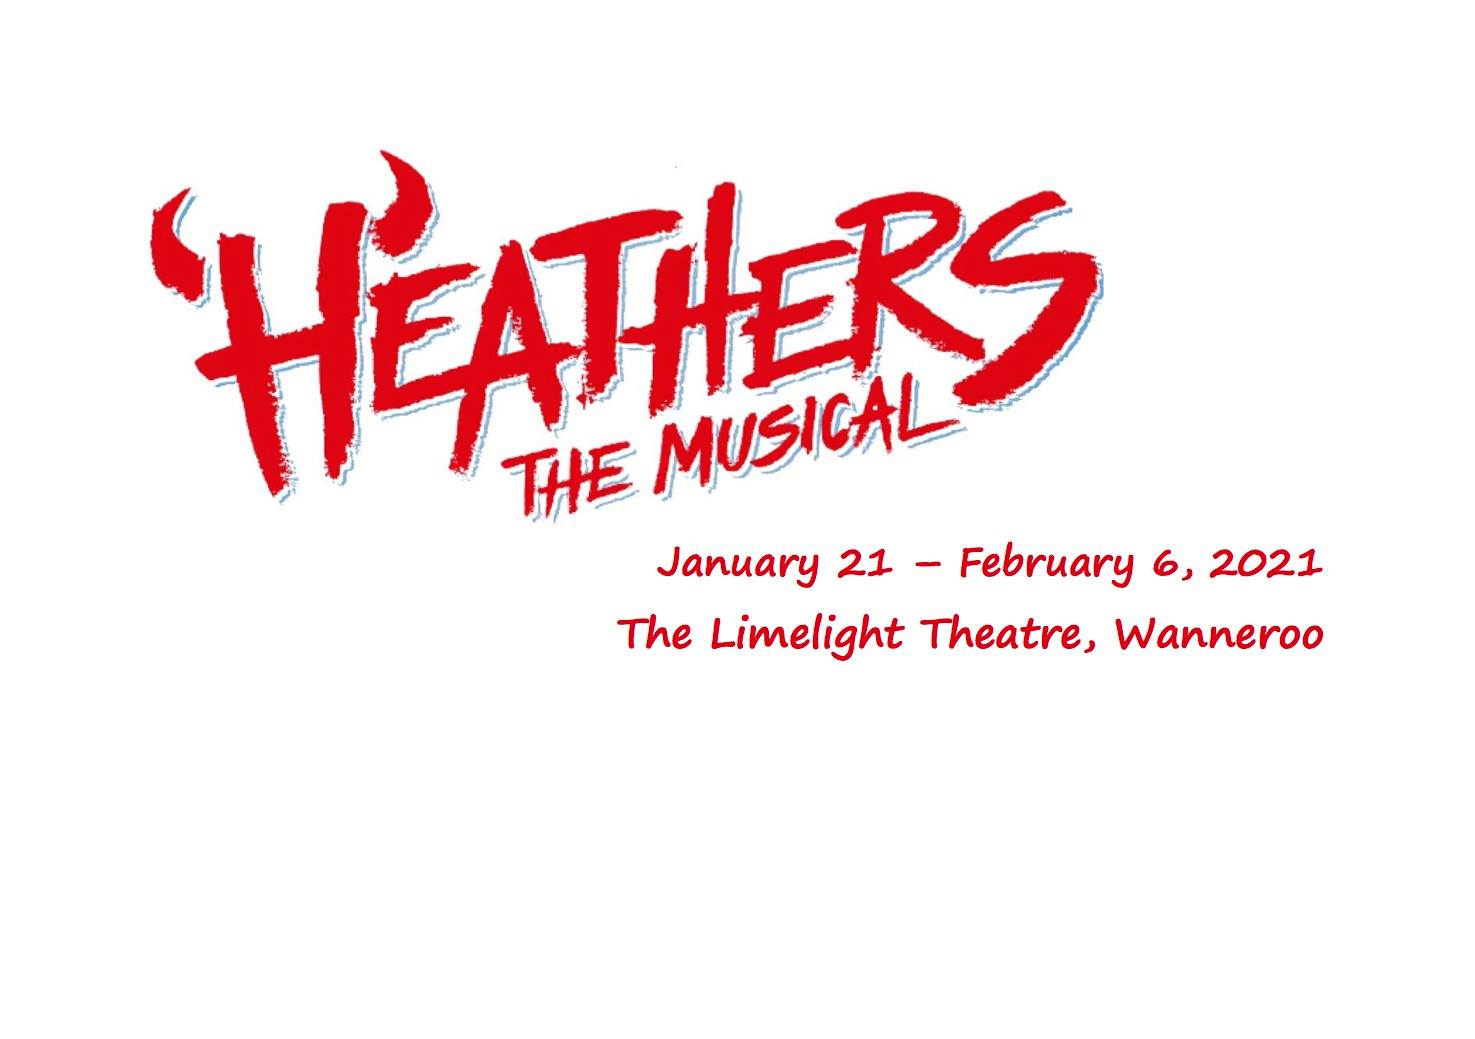 Banner for Heathers showing the title and dates and location in red text on a white background